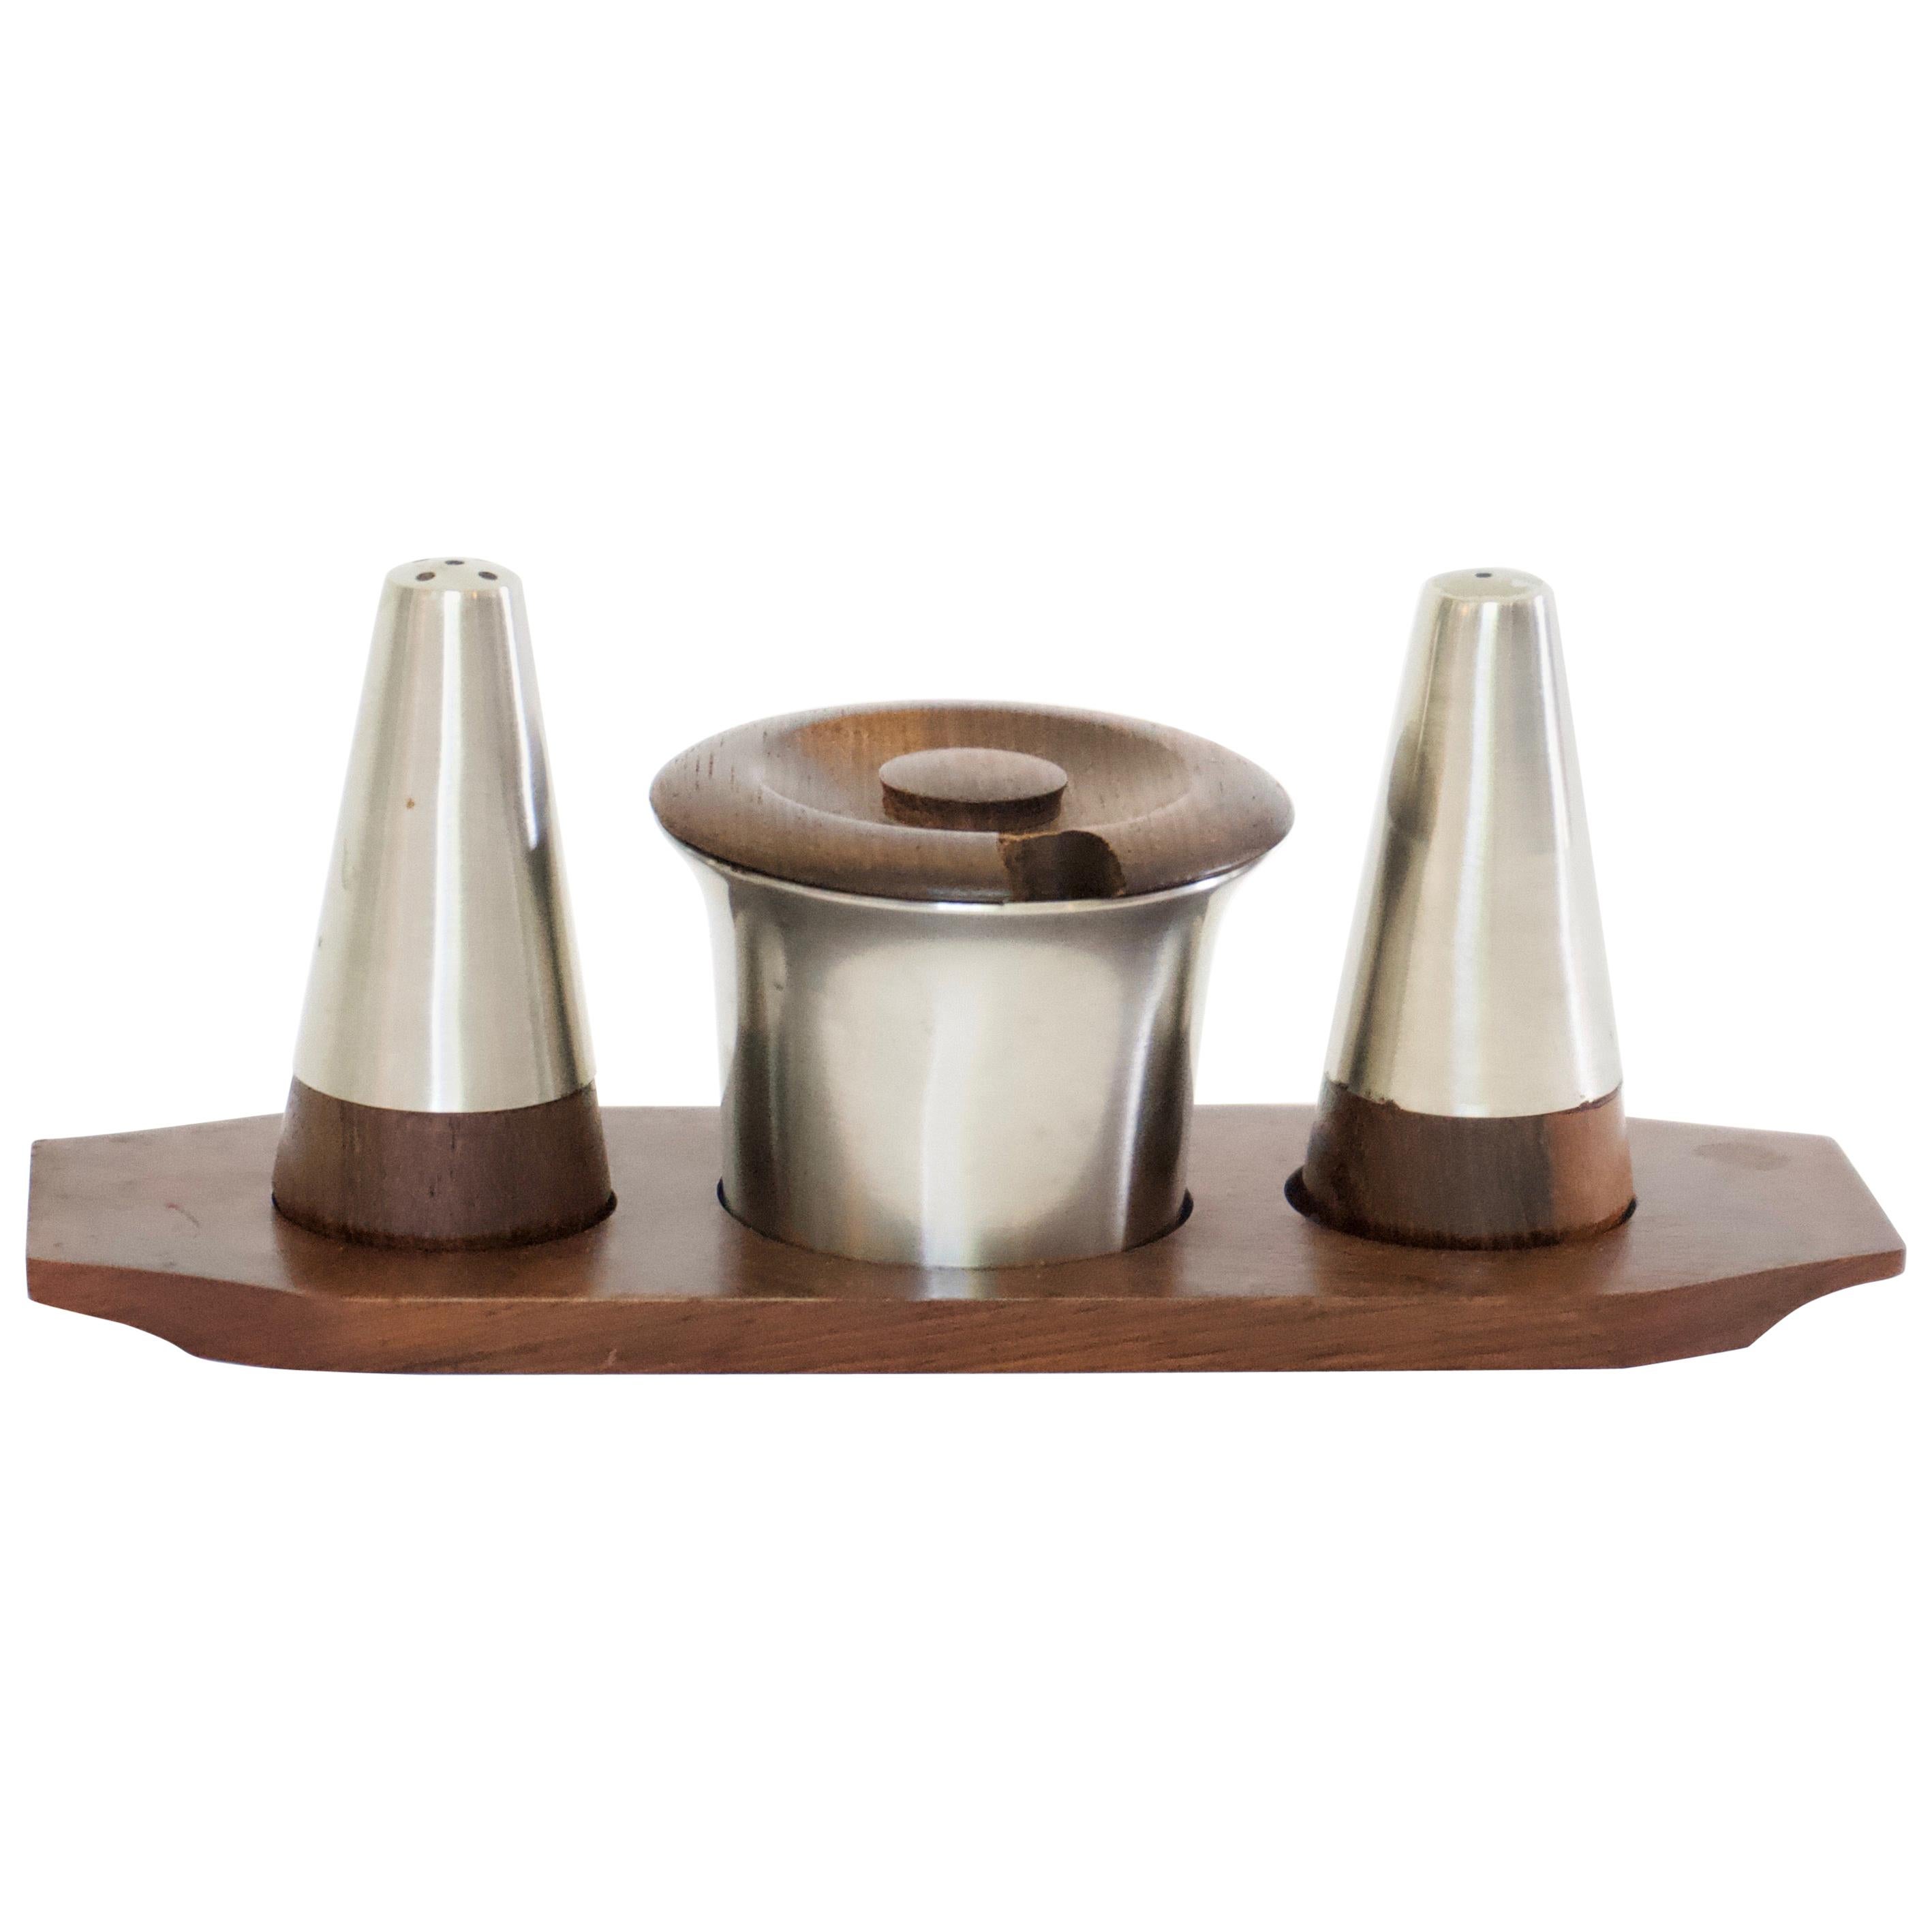 Mid-Century Modern Danish Rosewood Salt and Pepper Shaker Set by Lundtofte For Sale